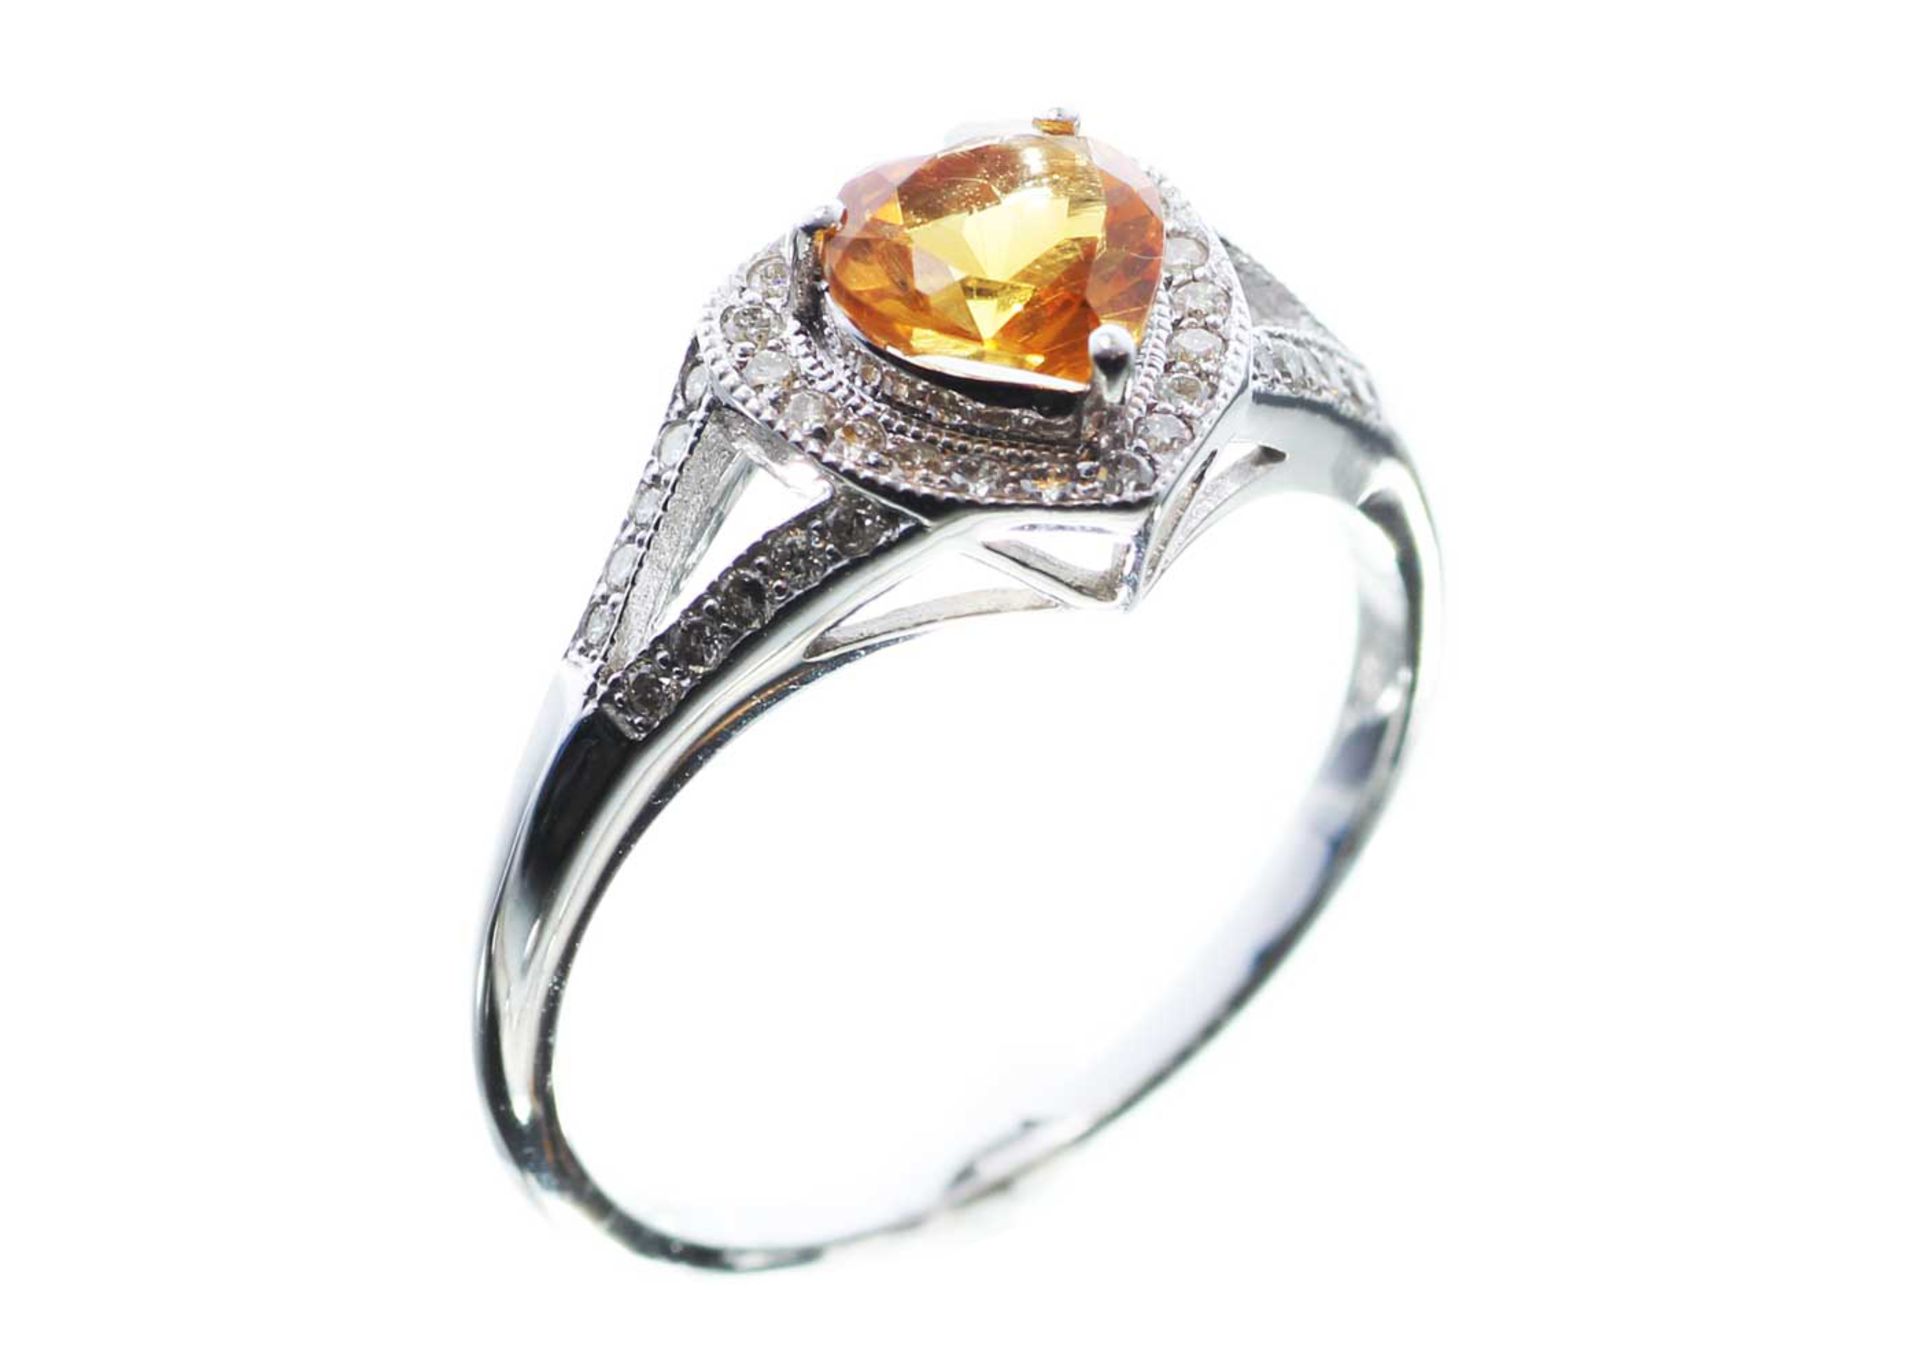 9ct White Gold Heart Shape Citrine Diamond Ring 0.20 Carats - Valued by GIE £2,445.00 - 9ct White - Image 2 of 5